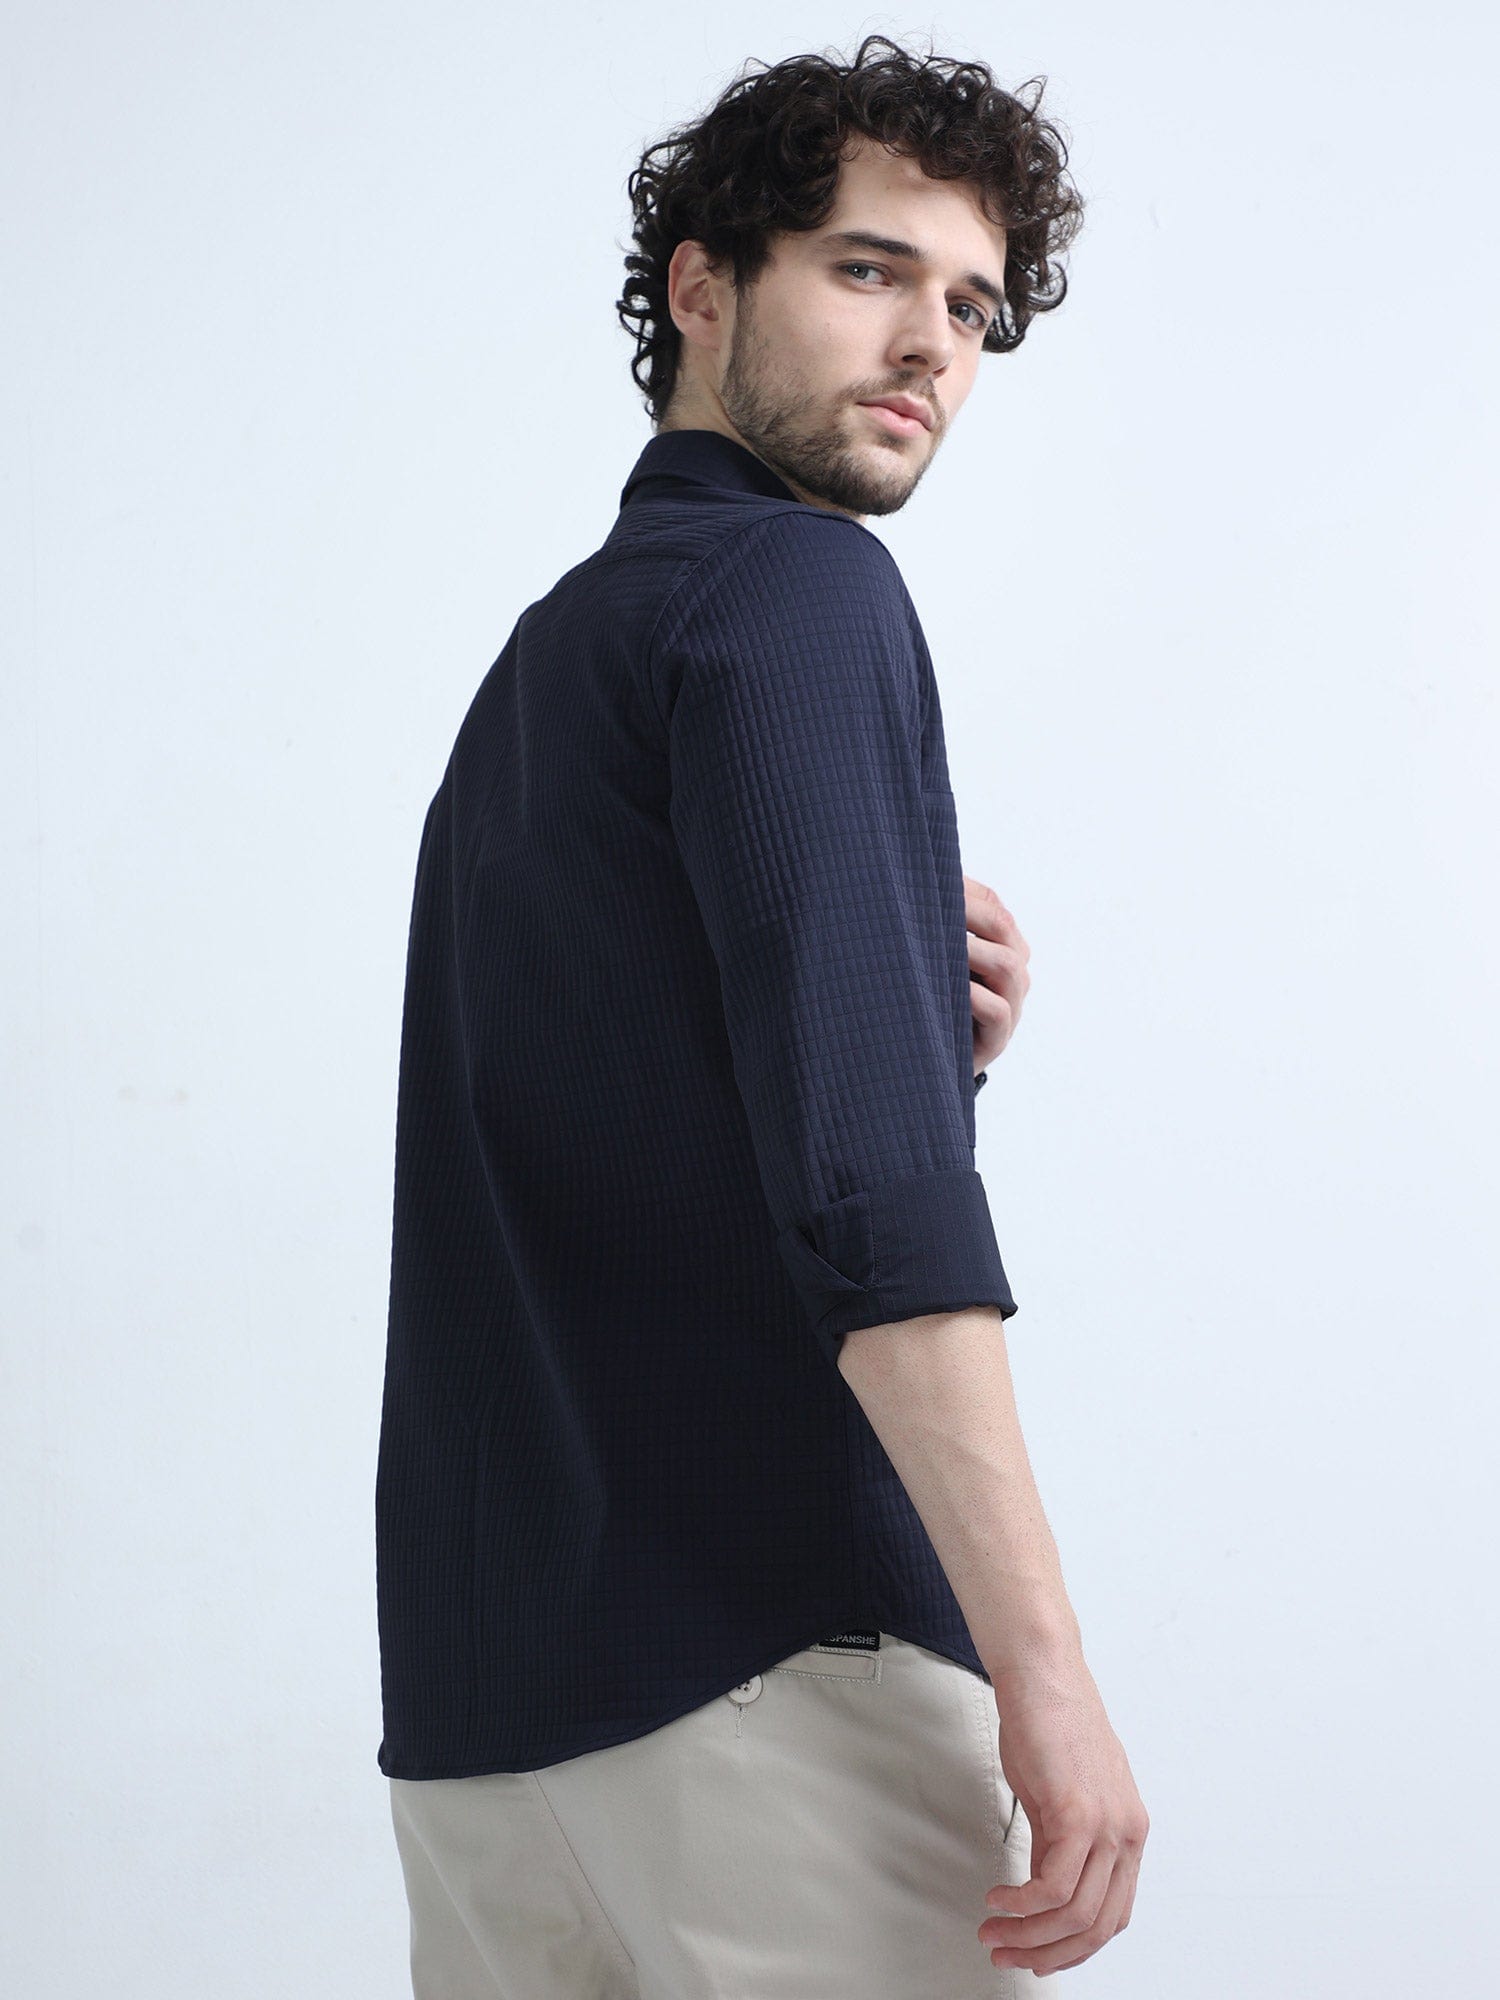 Buy Latest Dark Navy Blue Colour Shirt Online At Great PriceRs. 1349.00